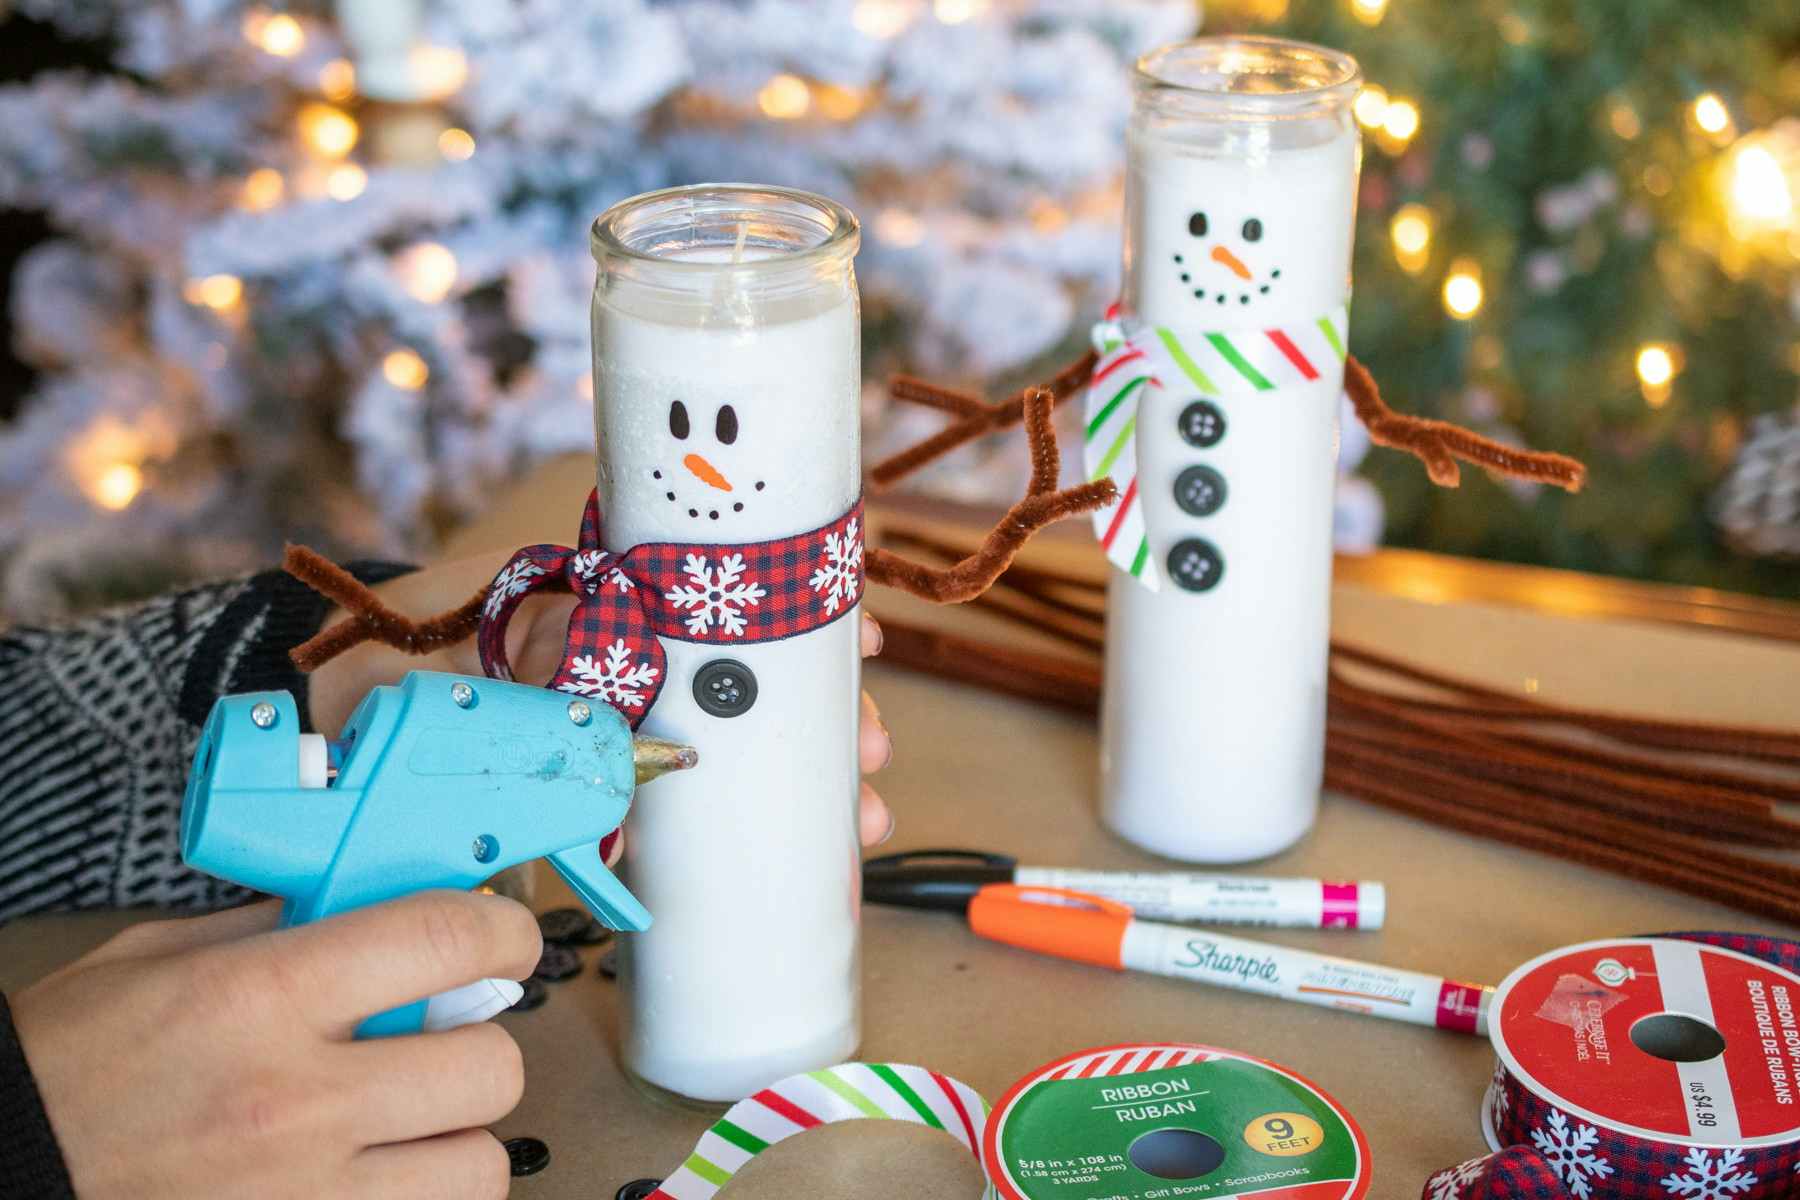 Dollar tree candles being decorated with ribbon, buttons, piper cleaners, and paint pens to look like snowmen.